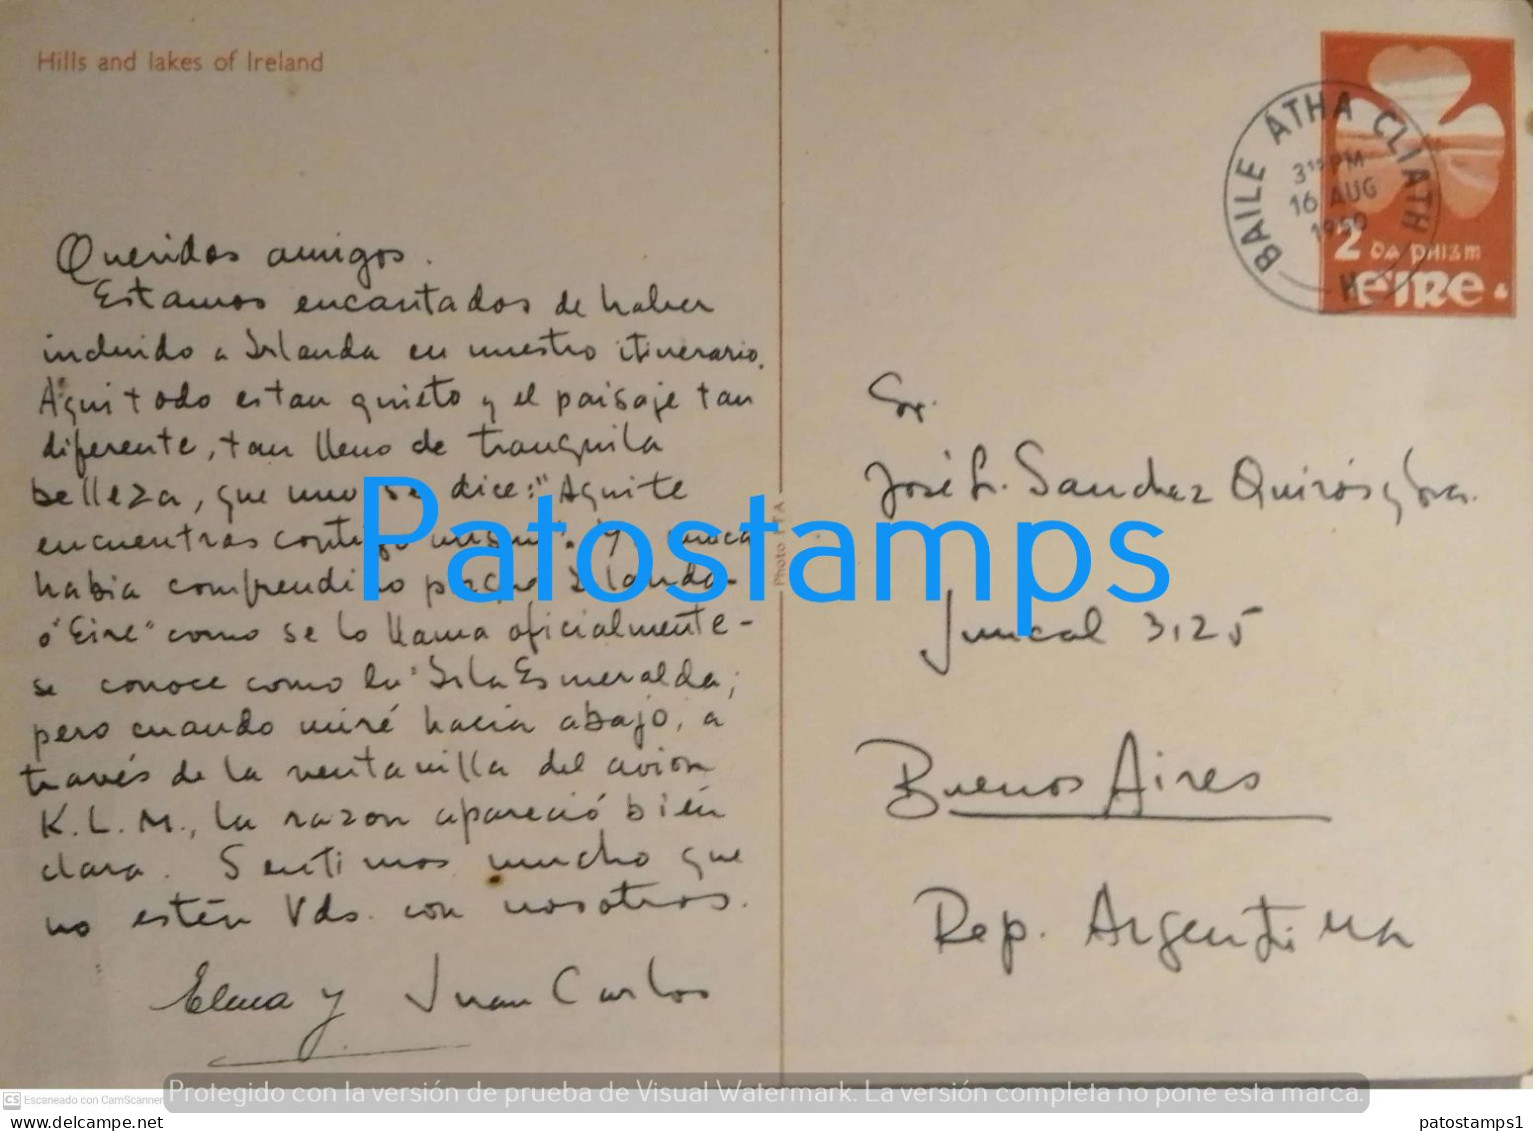 204102 IRELAND HILLS AND LAKES YEAR 1950 CIRCULATED TO ARGENTINA POSTAL SATIONERY POSTCARD - Enteros Postales